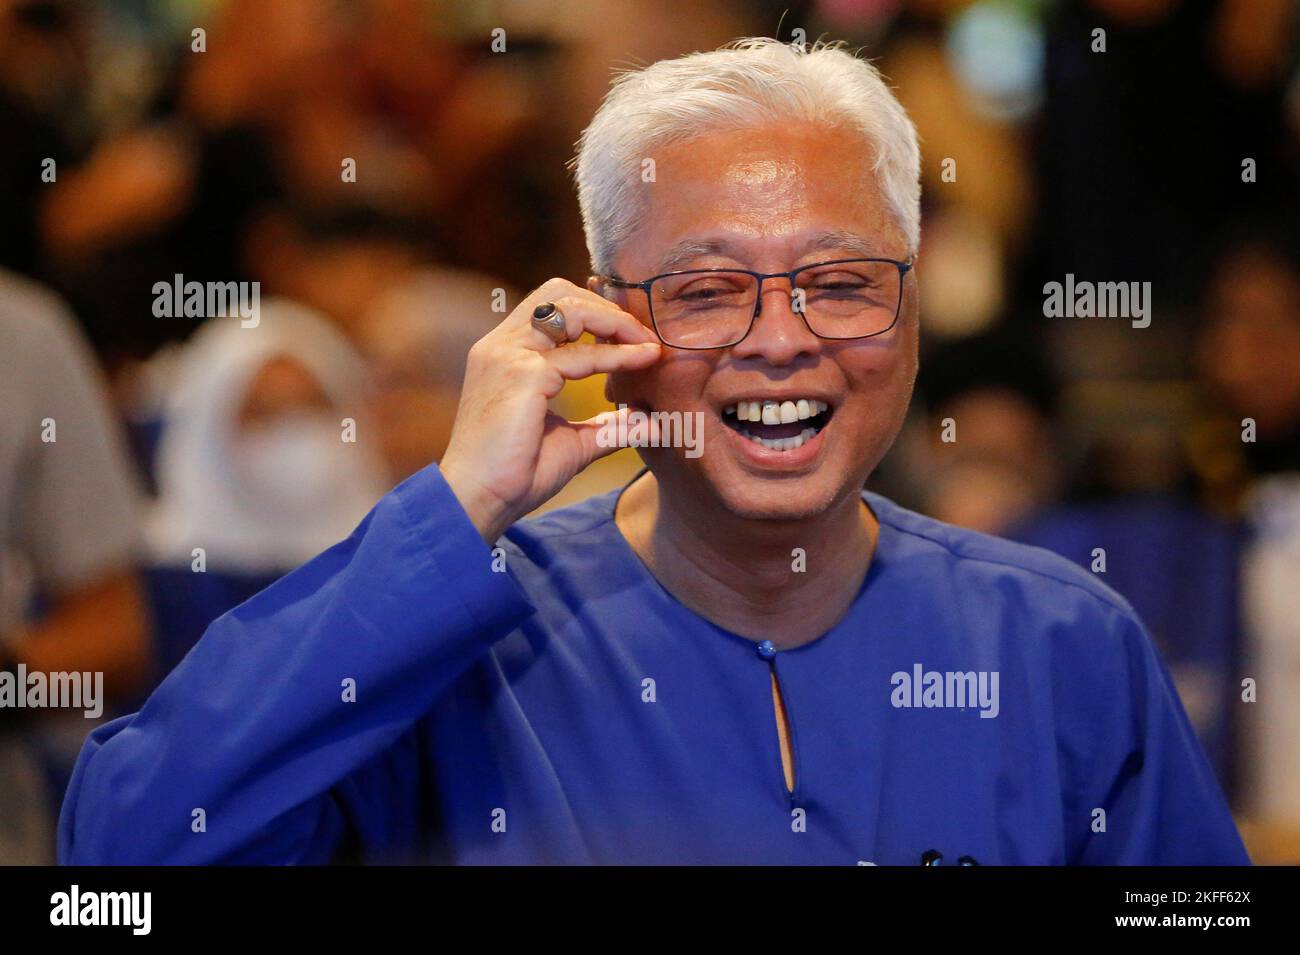 Malaysian Caretaker Prime Minister Ismail Sabri Yaakob gestures during his campaign rally, a day before the 15th general election in Bera, Pahang, Malaysia November 18, 2022. REUTERS/Lai Seng Sin Stock Photo